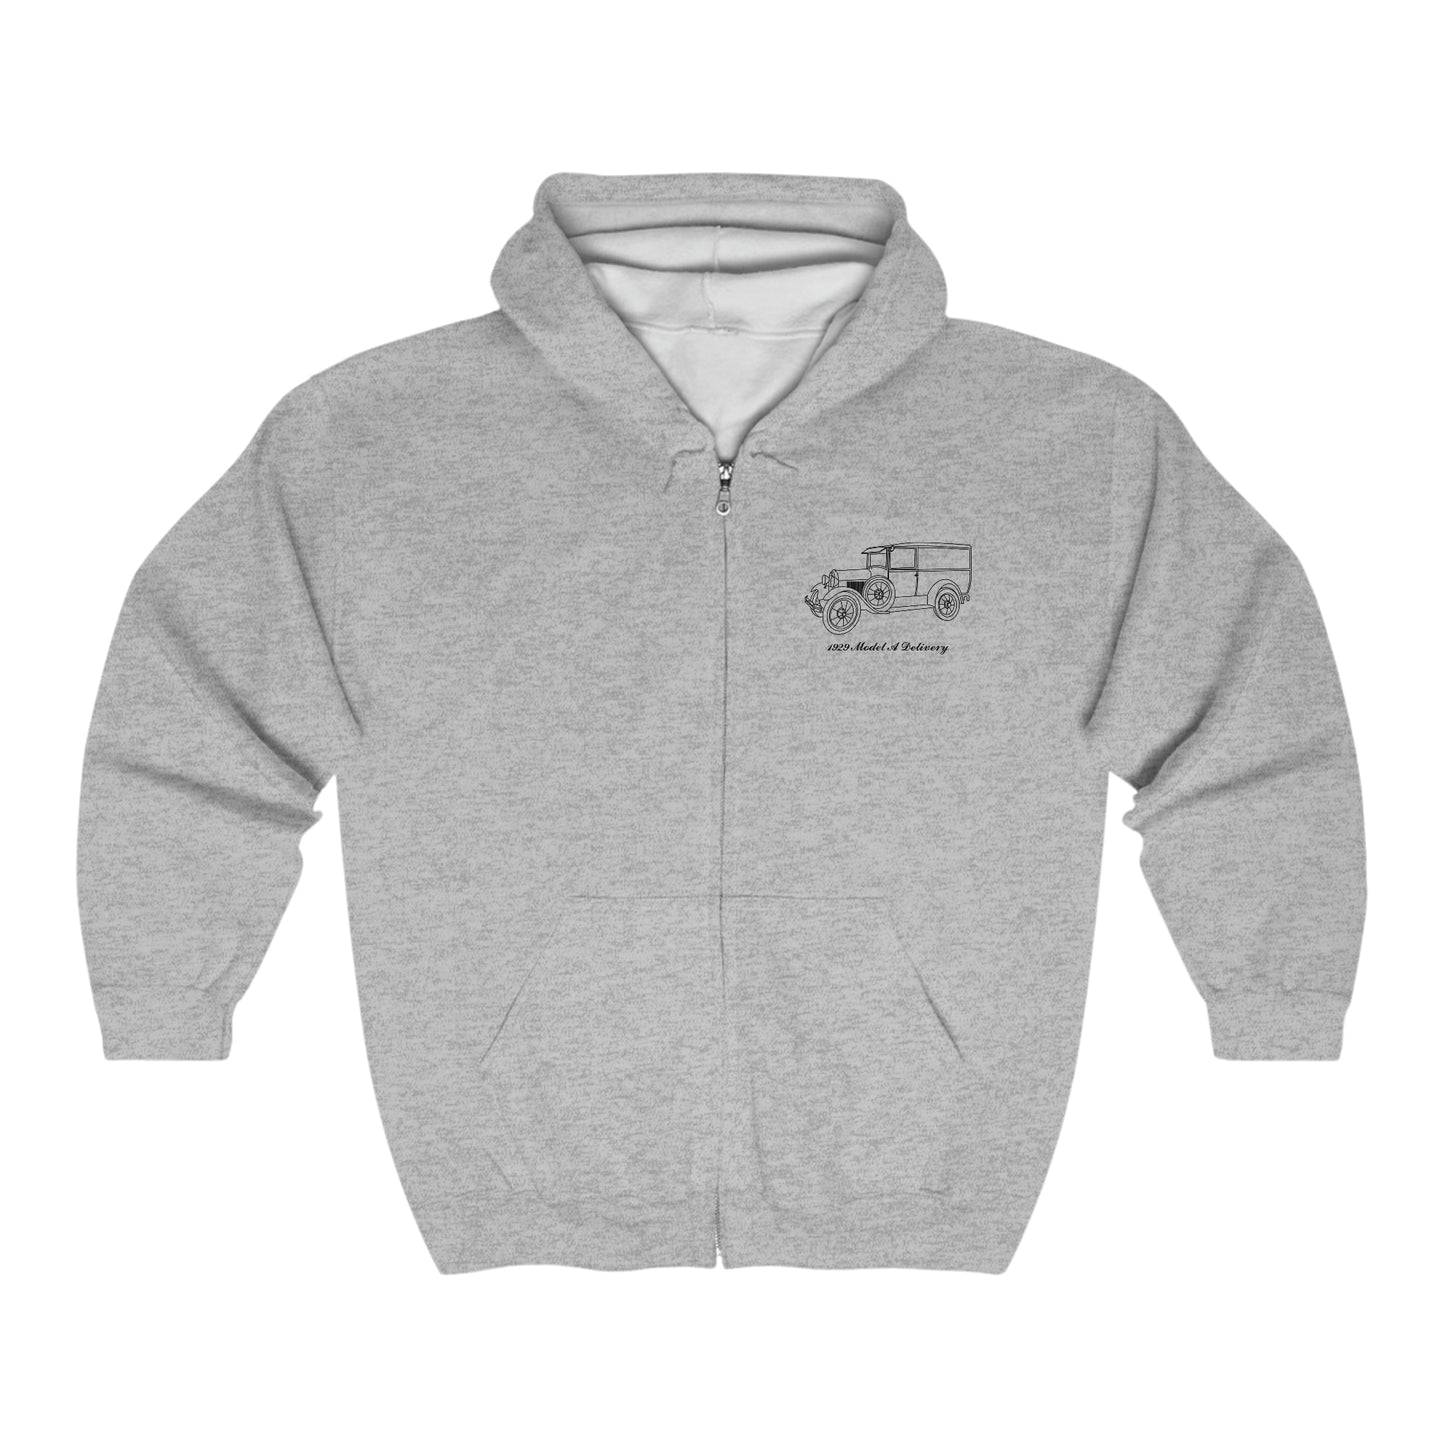 1929 Delivery Hoodie